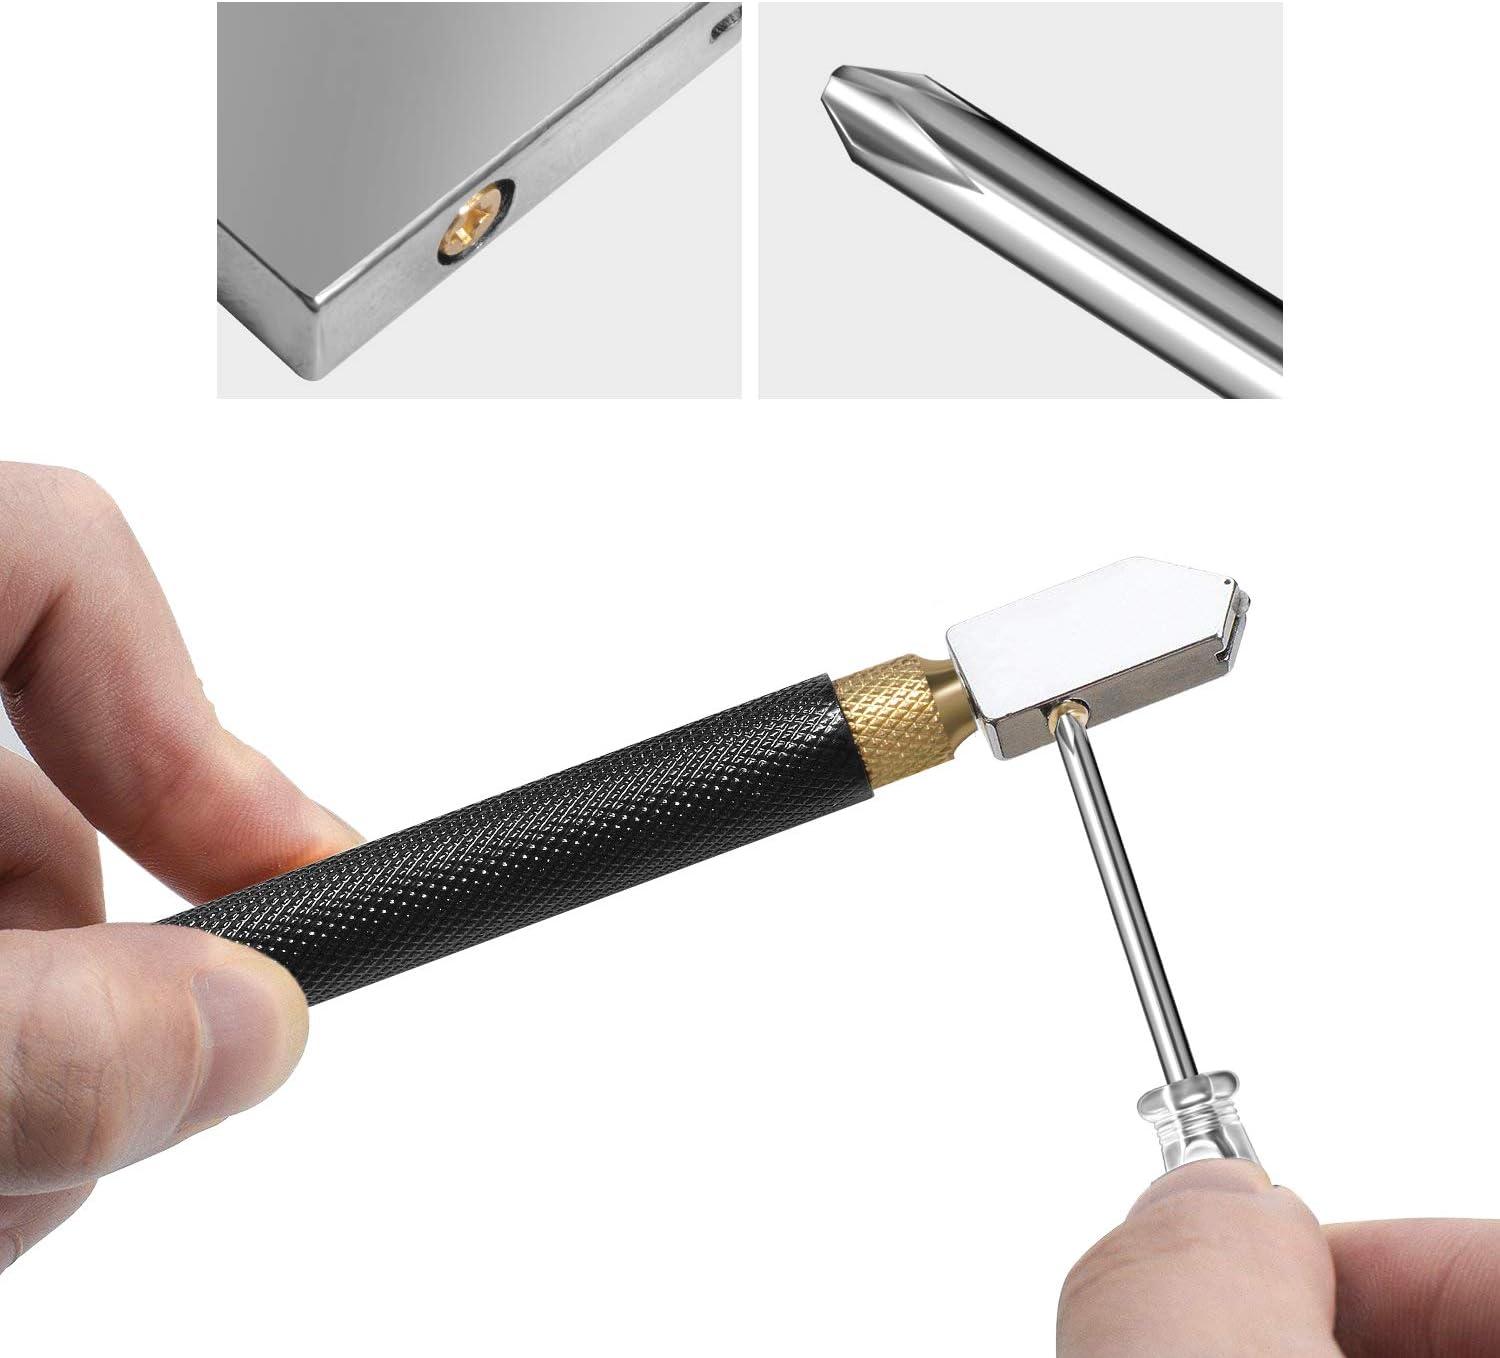 Glass Cutter 2mm-20mm Tool Set Upgraded Glass Cutting Tool Glass Cutting  Set with 3 Carbide Cutting Head 1 Screwdriver and 1 Oil Dropper.